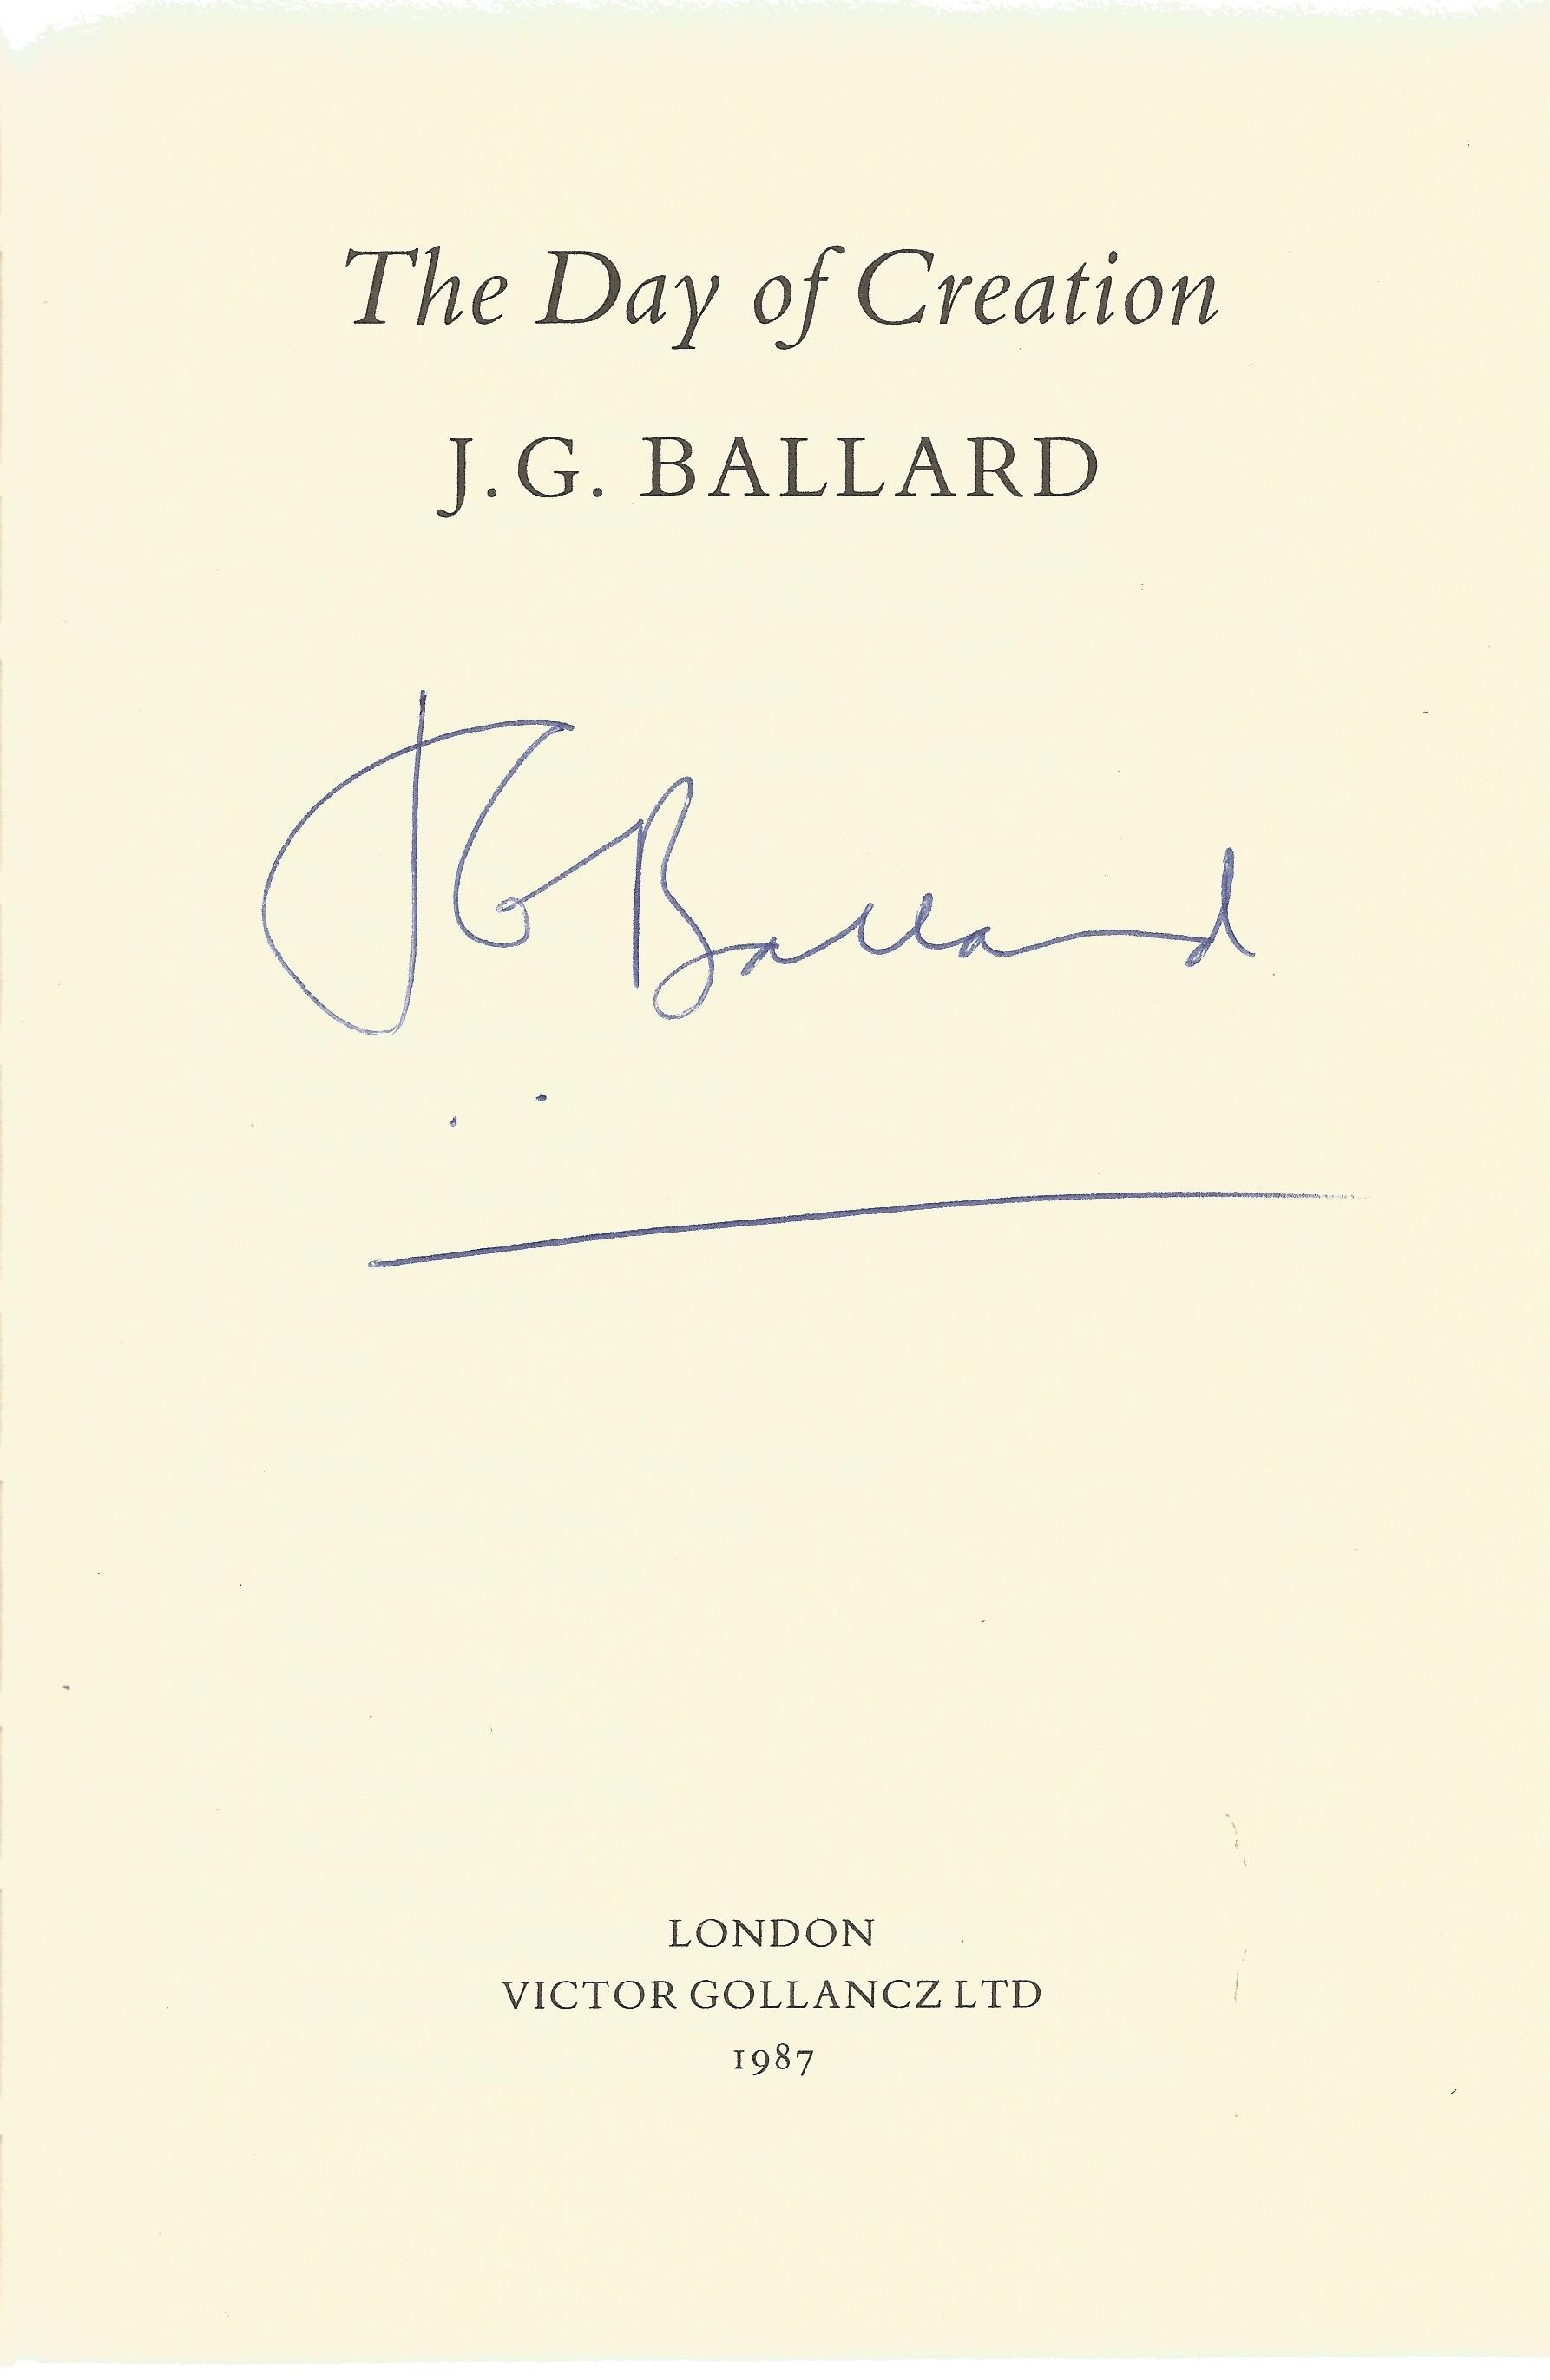 J. G. Ballard Hardback Book The Day of Creation signed by the Author on the Title Page First Edition - Image 2 of 2